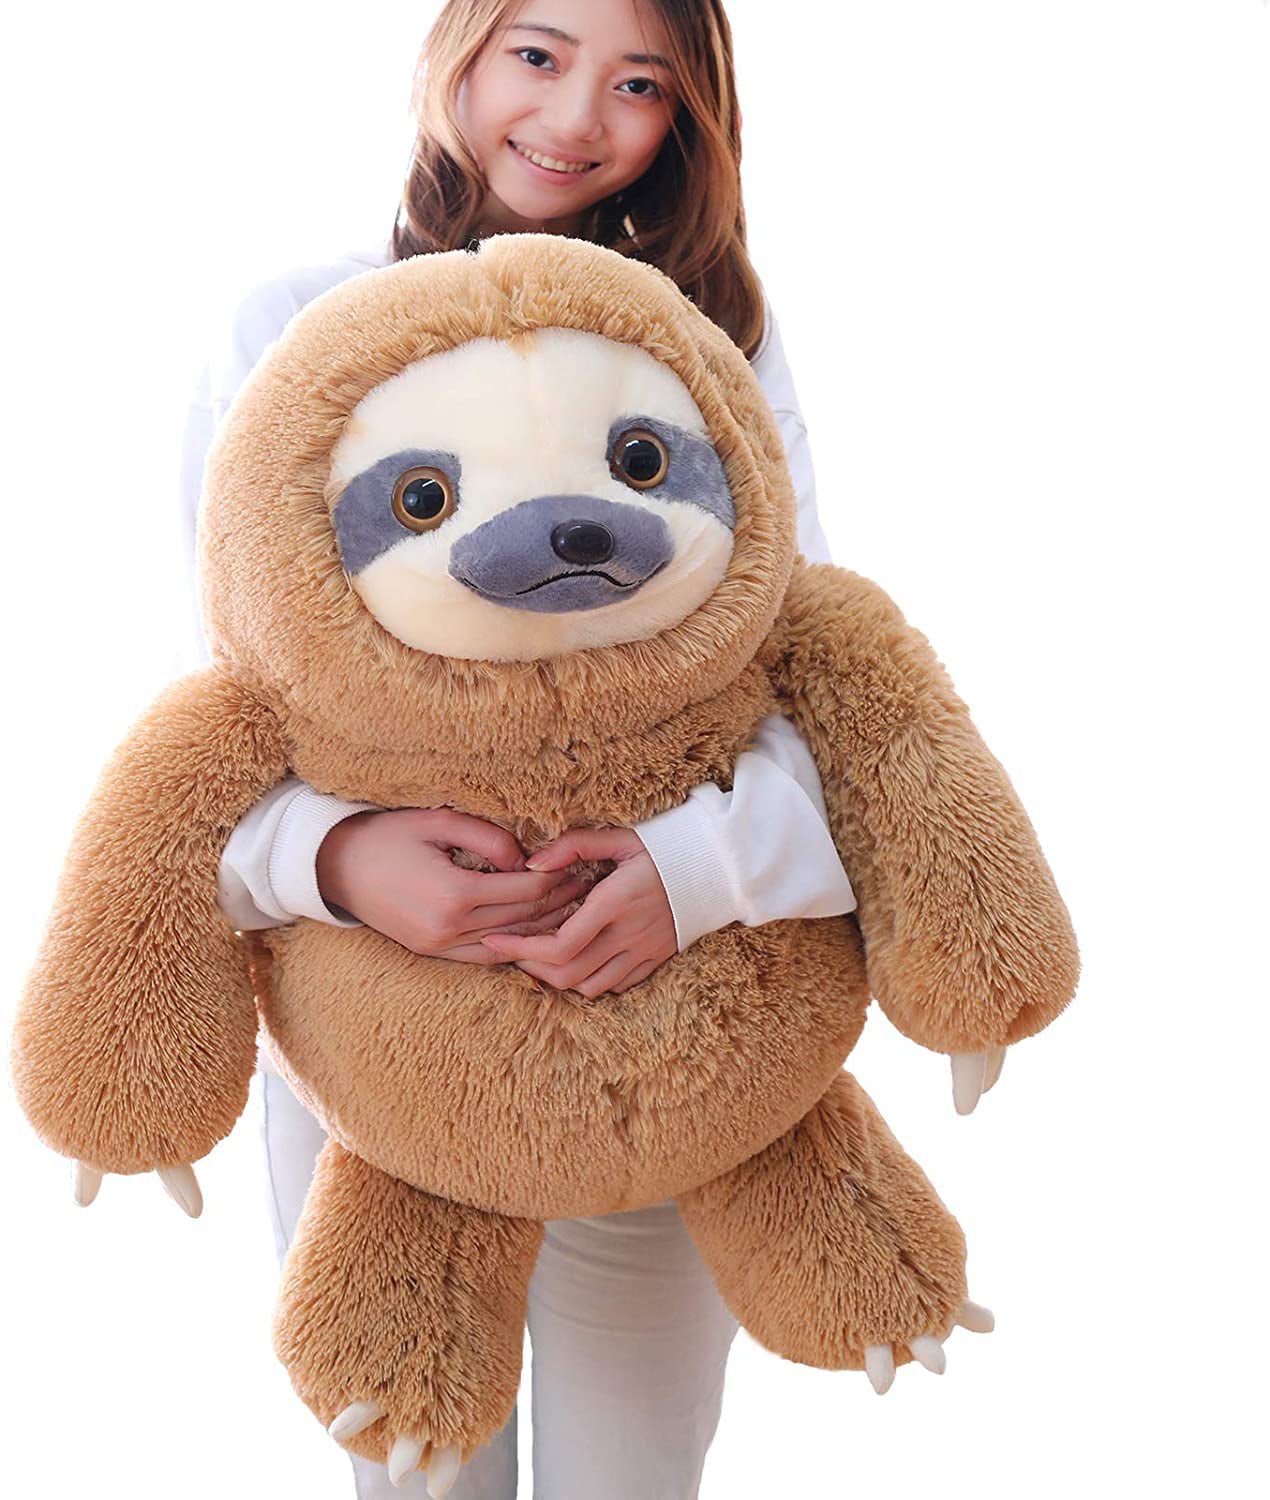 Giant Fluffy Sloth Stuffed Animal Toy,Kids Plush Sloth Toy Birthday Gifts  for Boys and Girls,Large Stuffed Sloth Toy, Inches 